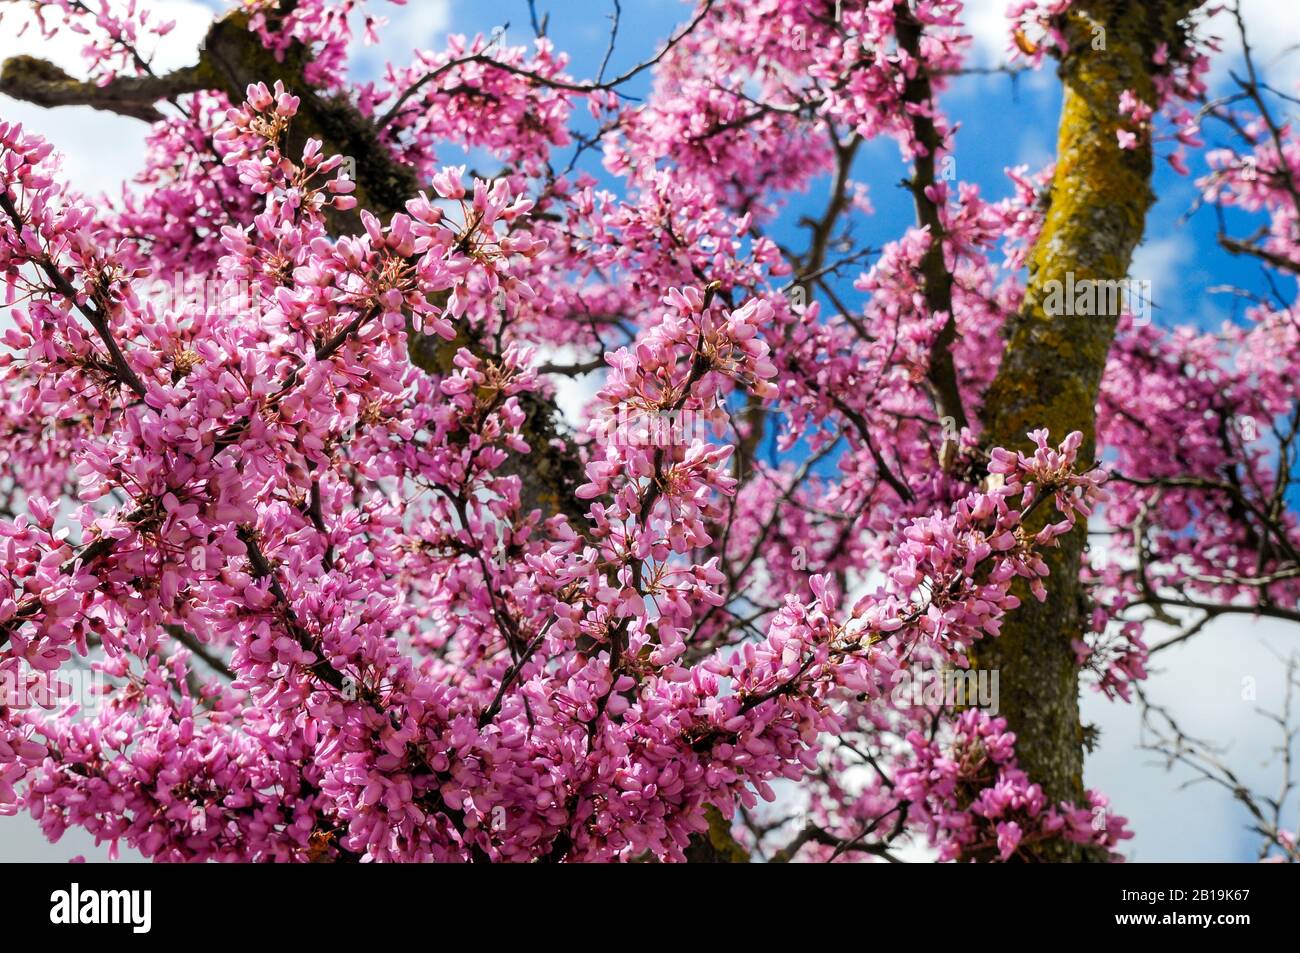 Background with small pink flowers. View of a tree blossoms in sakura. Tree of love, Cercis siliquastrum. Stock Photo